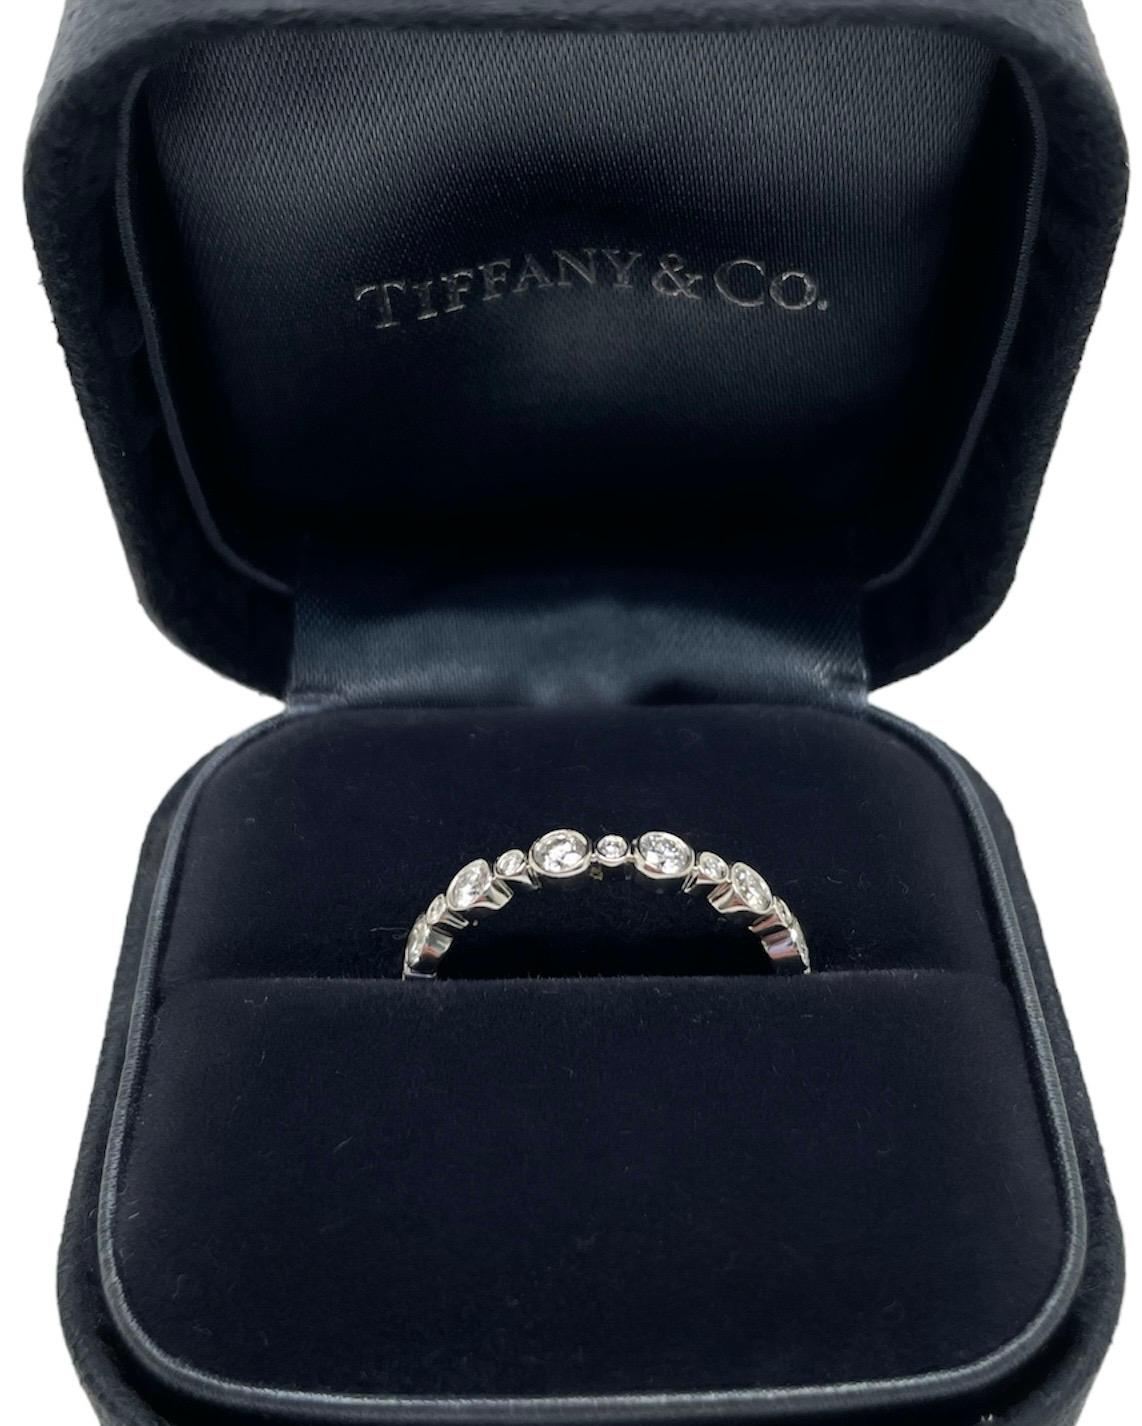 This classic ring from the Tiffany & Co. Jazz Collection contains 26 top quality round brilliant cut diamonds weighing approximately 1.00 carat total. Mounted in platinum, this bezel set, low profile band is a perfect addition to your ring